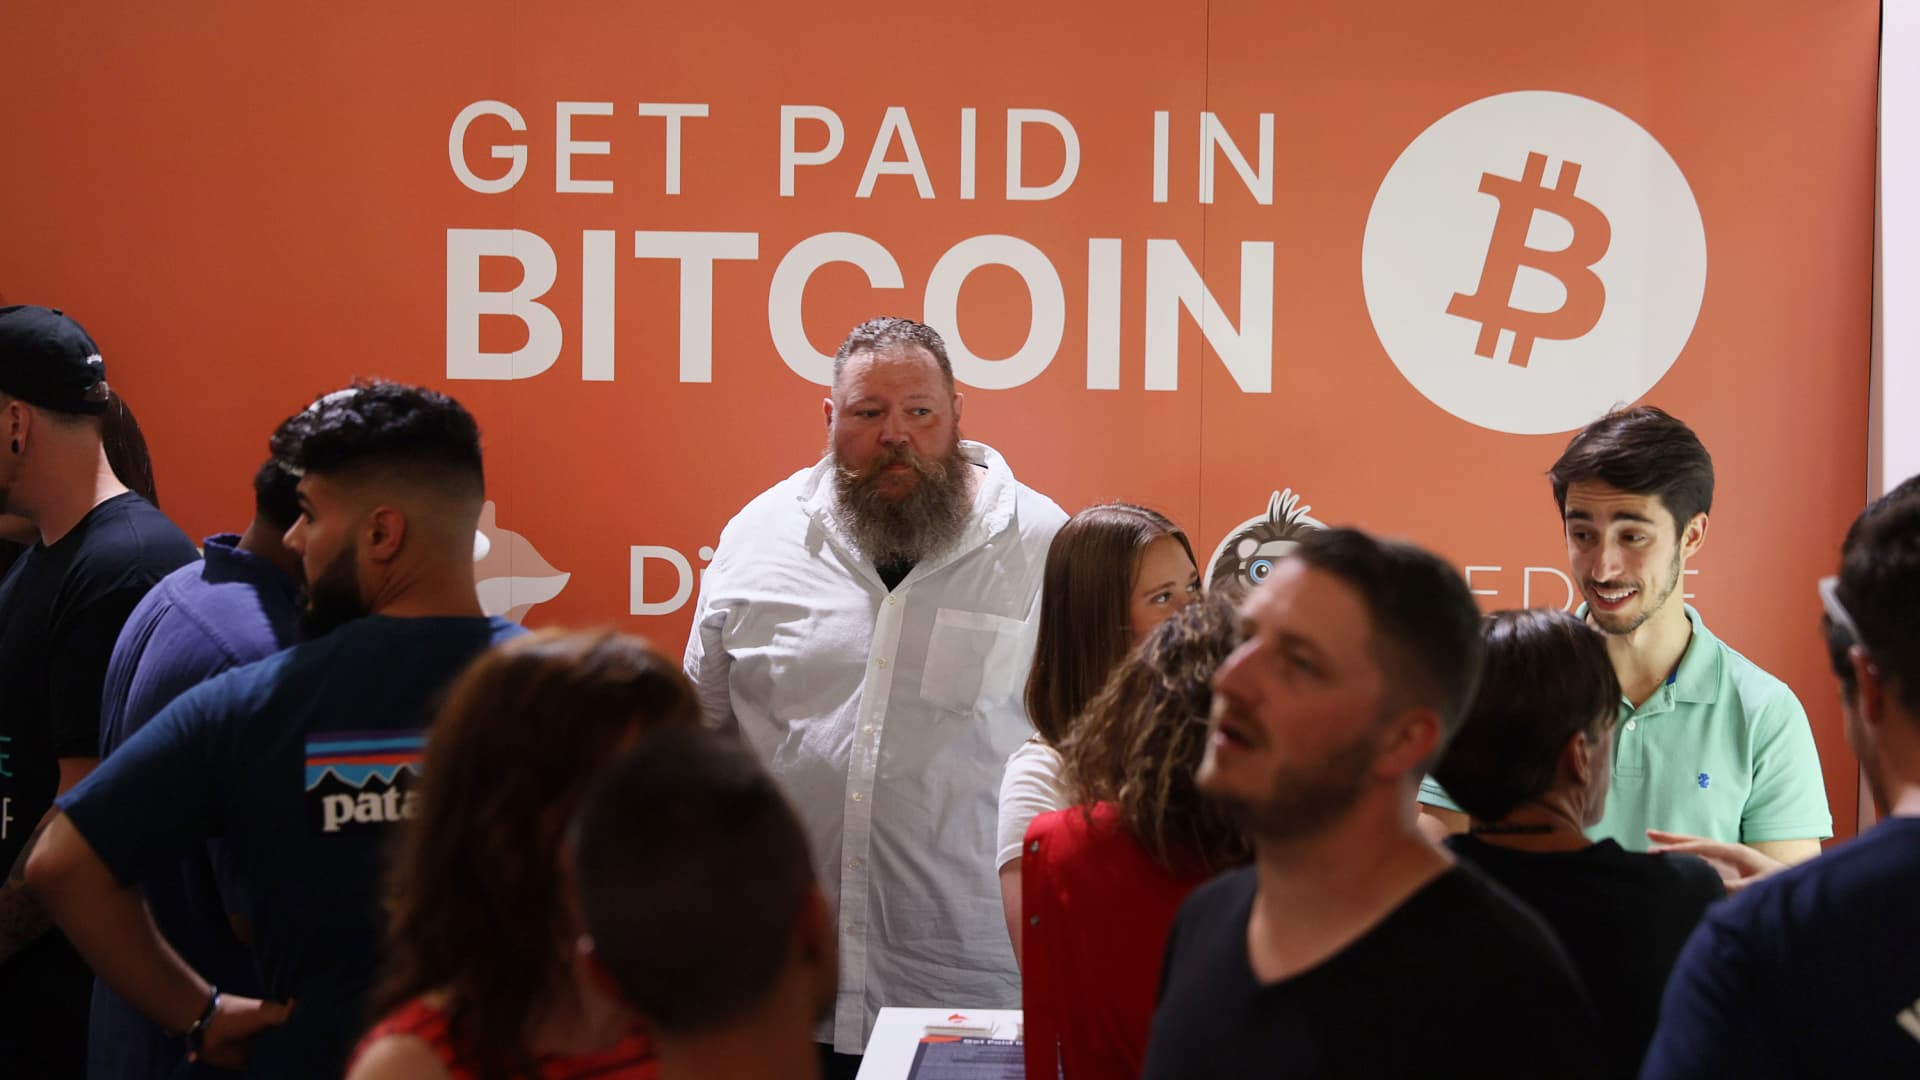 Dave Pope (center) works in the Digifox booth setup at the Bitcoin 2021 Convention, a cryptocurrency conference held in Miami on June 4, 2021.